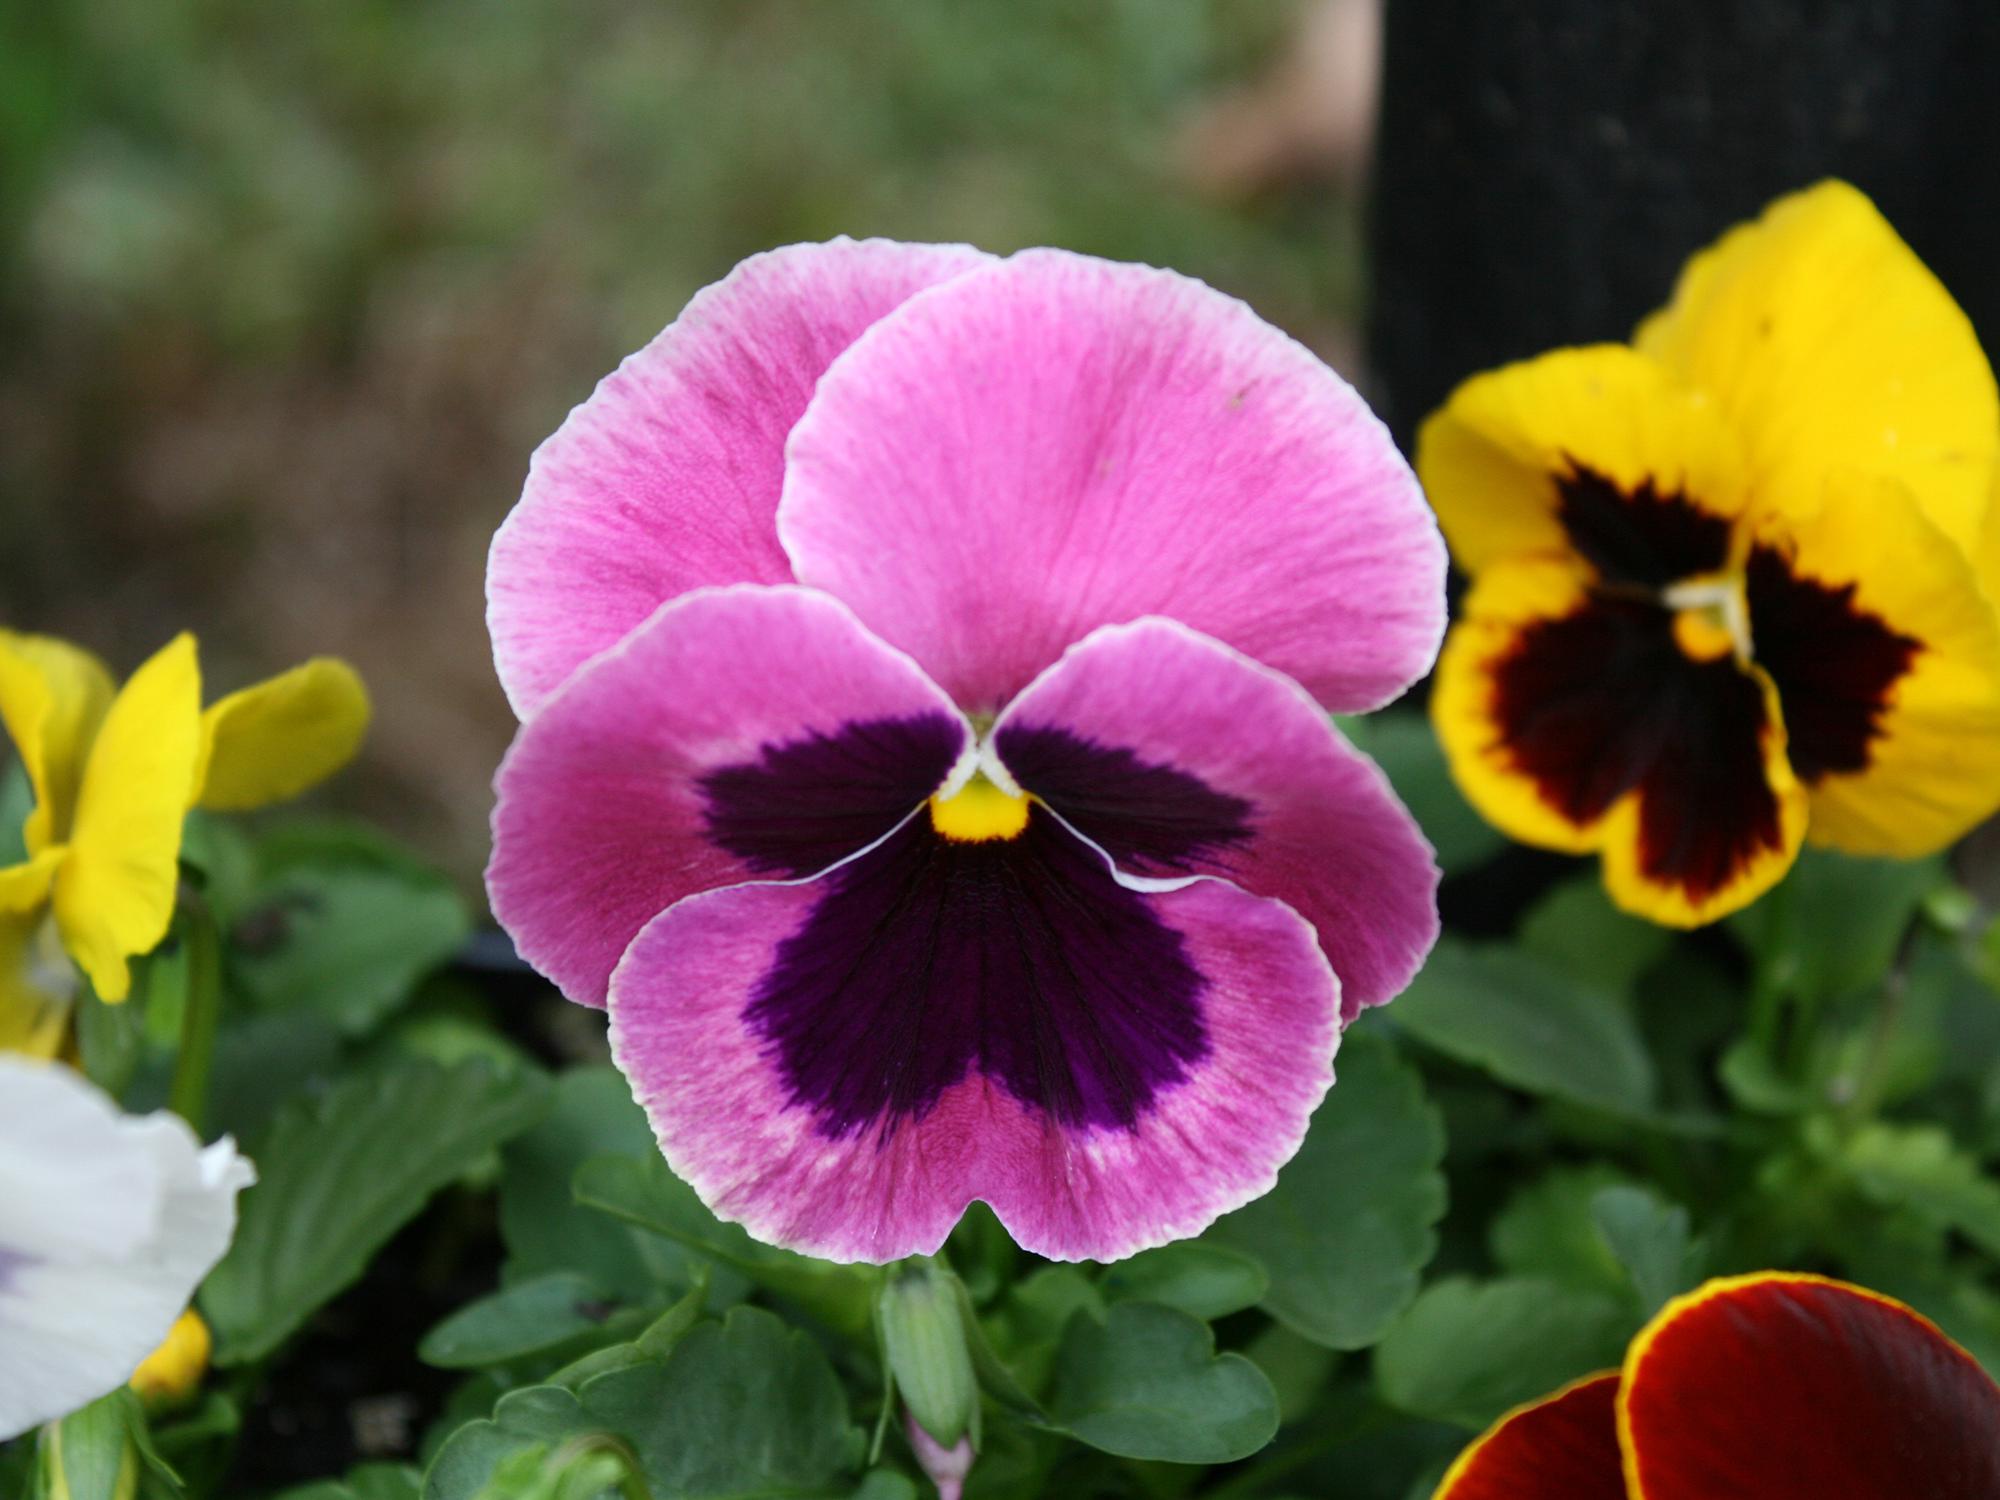 A close-up of a pink pansy with a dark maroon blotch in the center.